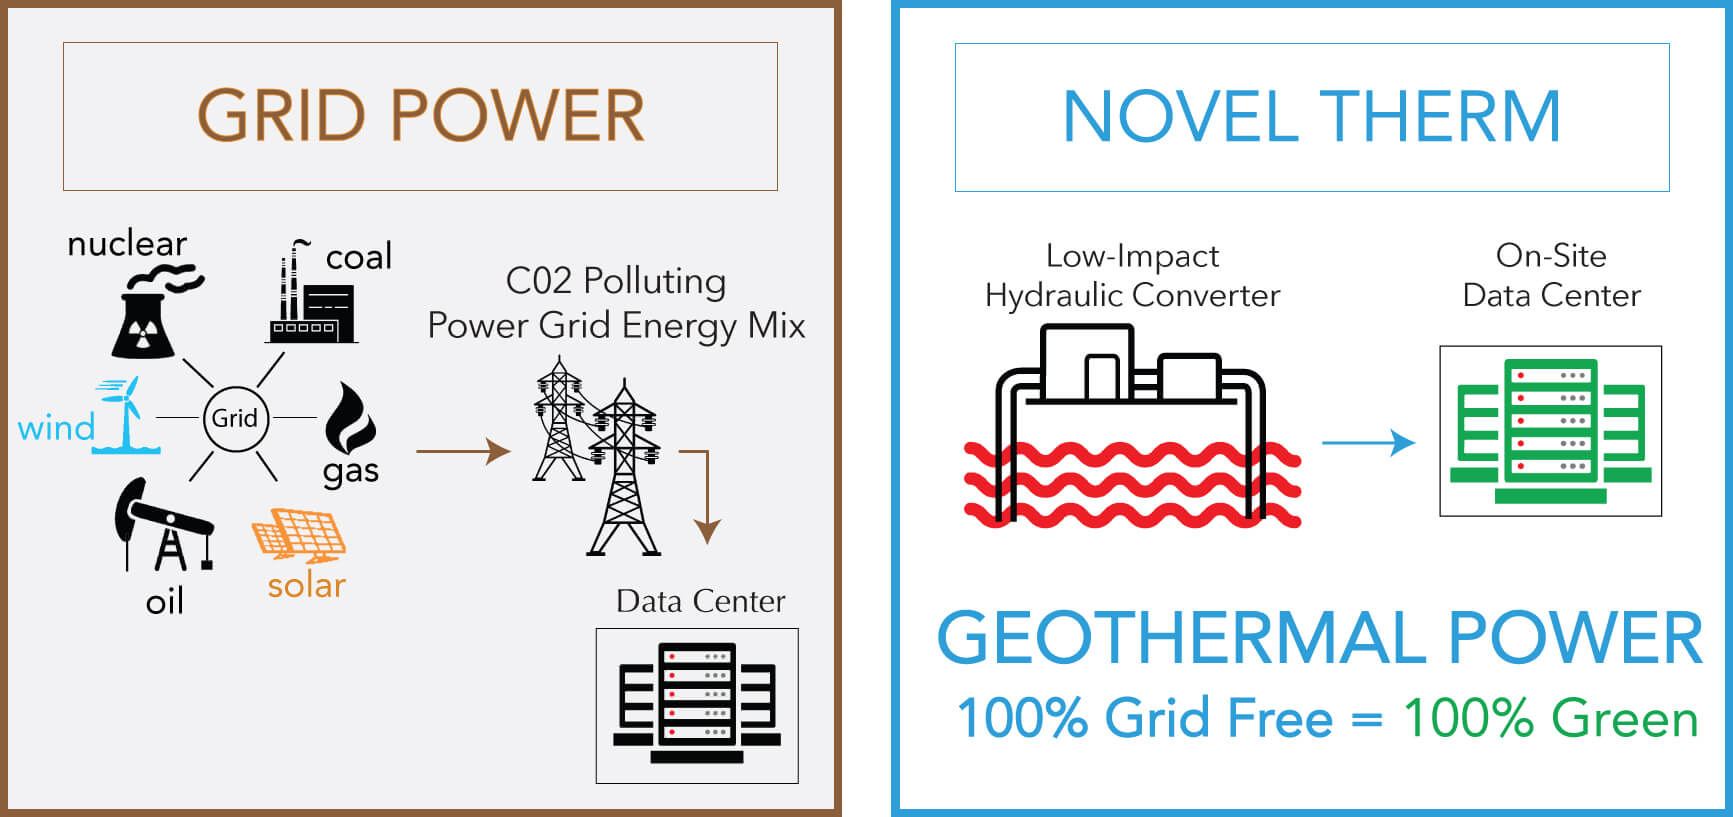 Image of a green comparison between power coming from the grid versus Noveltherm's off grid power. Noveltherm is 100% green